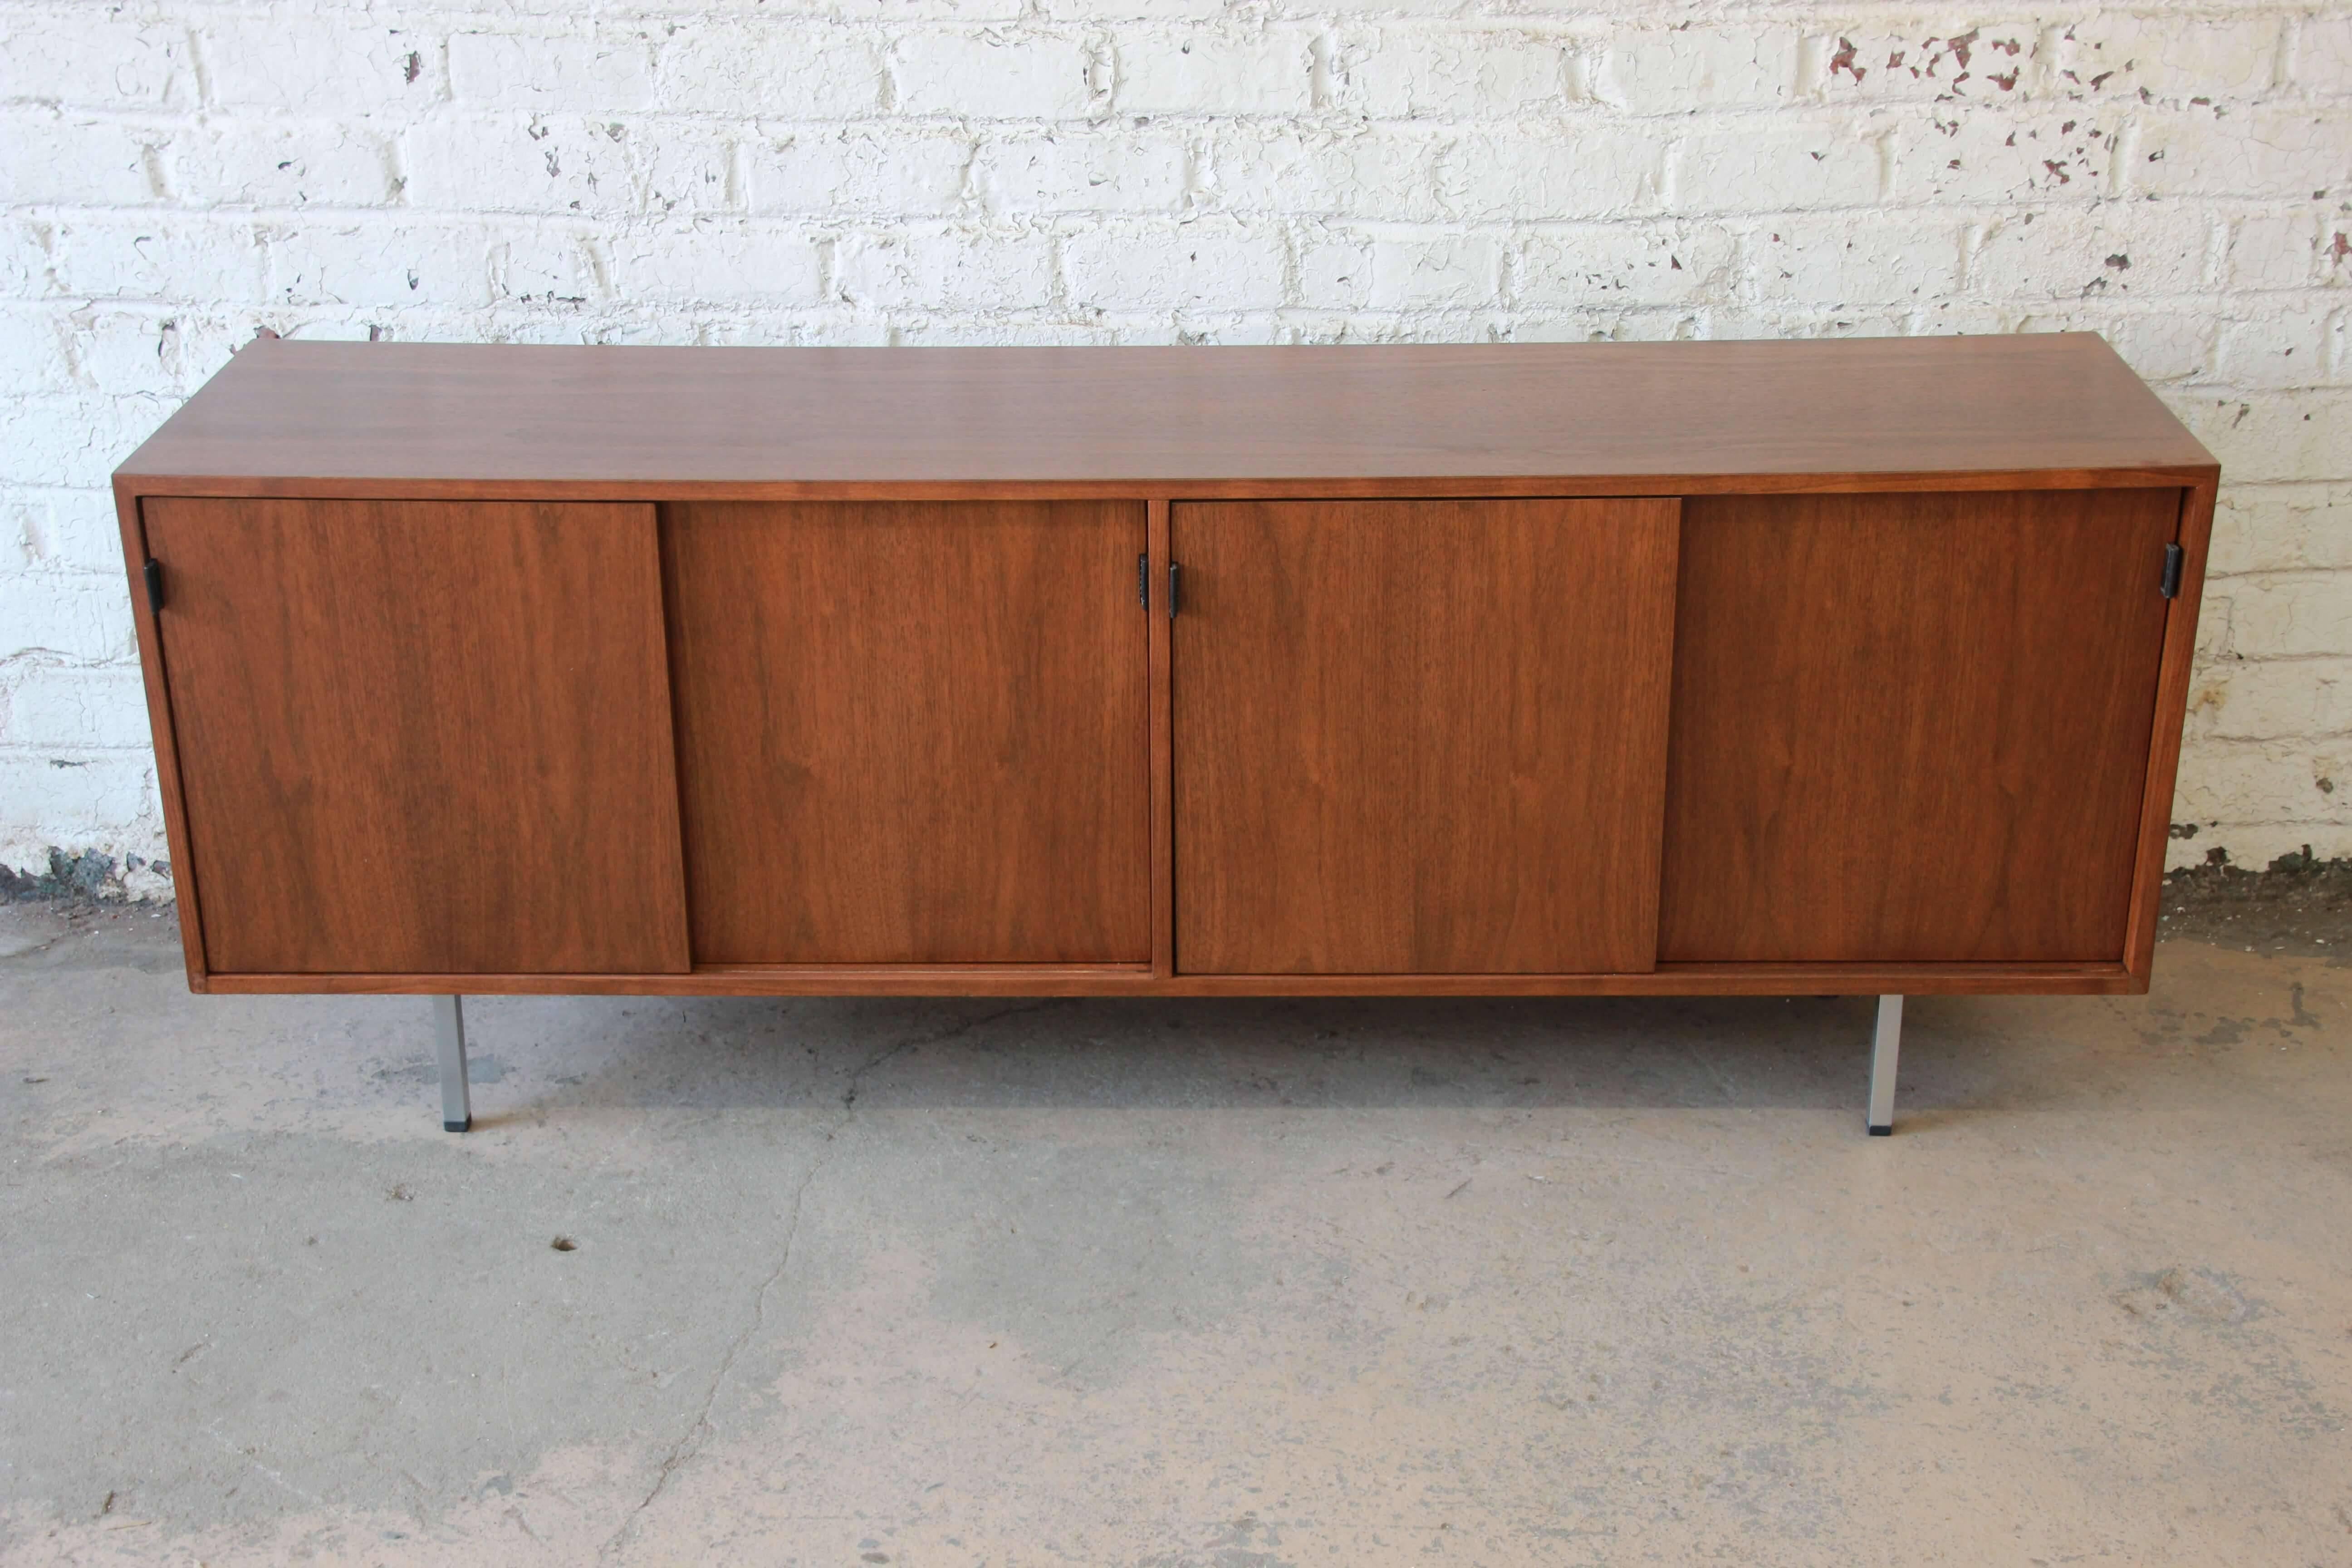 Offering a stunning newly restored Mid-Century Modern walnut credenza by Florence Knoll. This credenza has polished chrome legs supporting the beautiful walnut credenza case. There are four sliding doors with genuine leather pulls. The left door